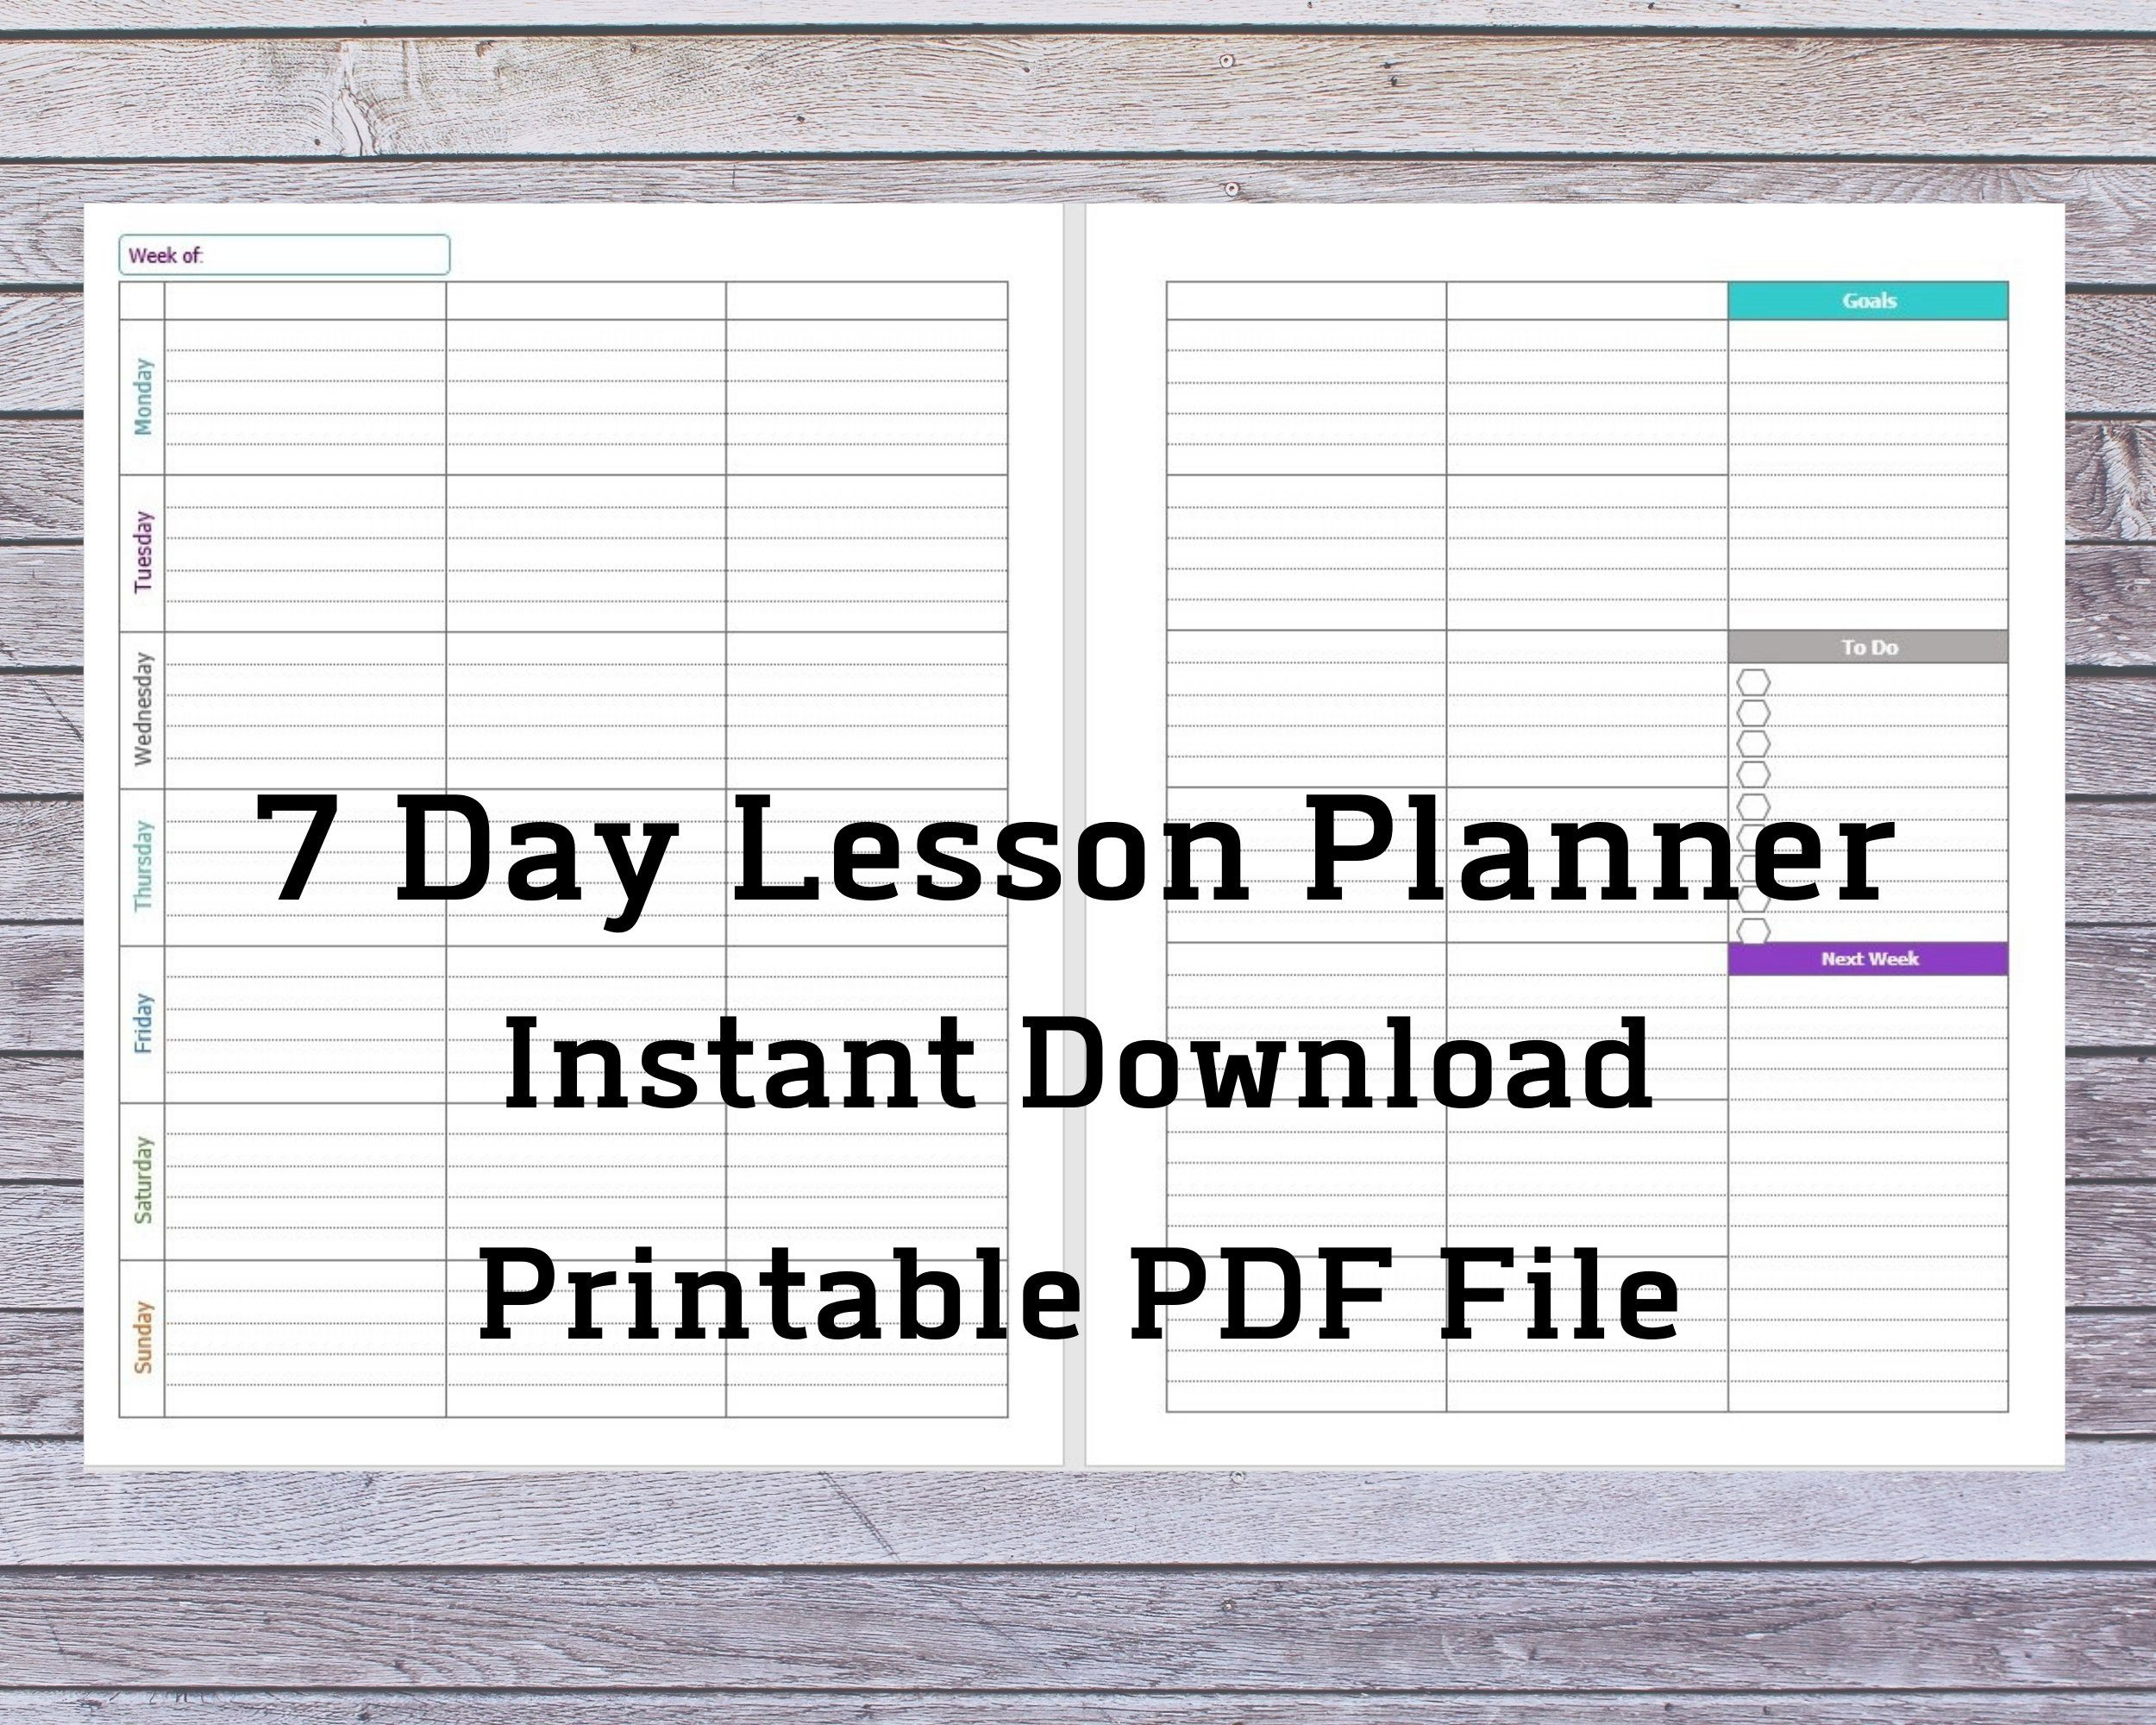 7 Day Weekly Lesson Planner Homeschool Lesson Planner Printable 7 Day Planner